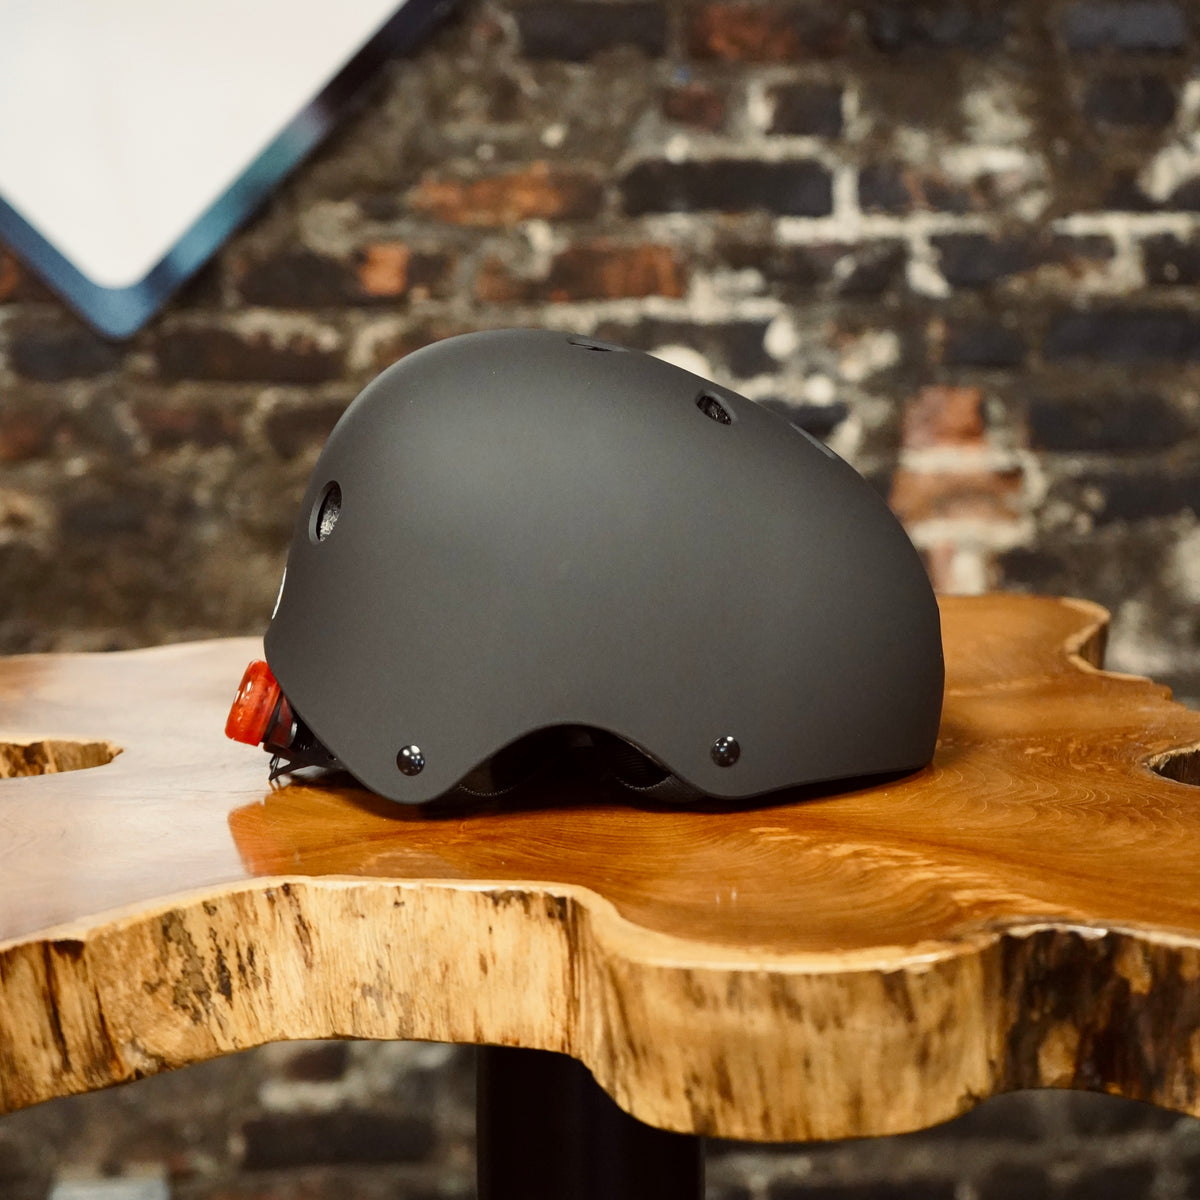 Evolve Helmet - One size fits most